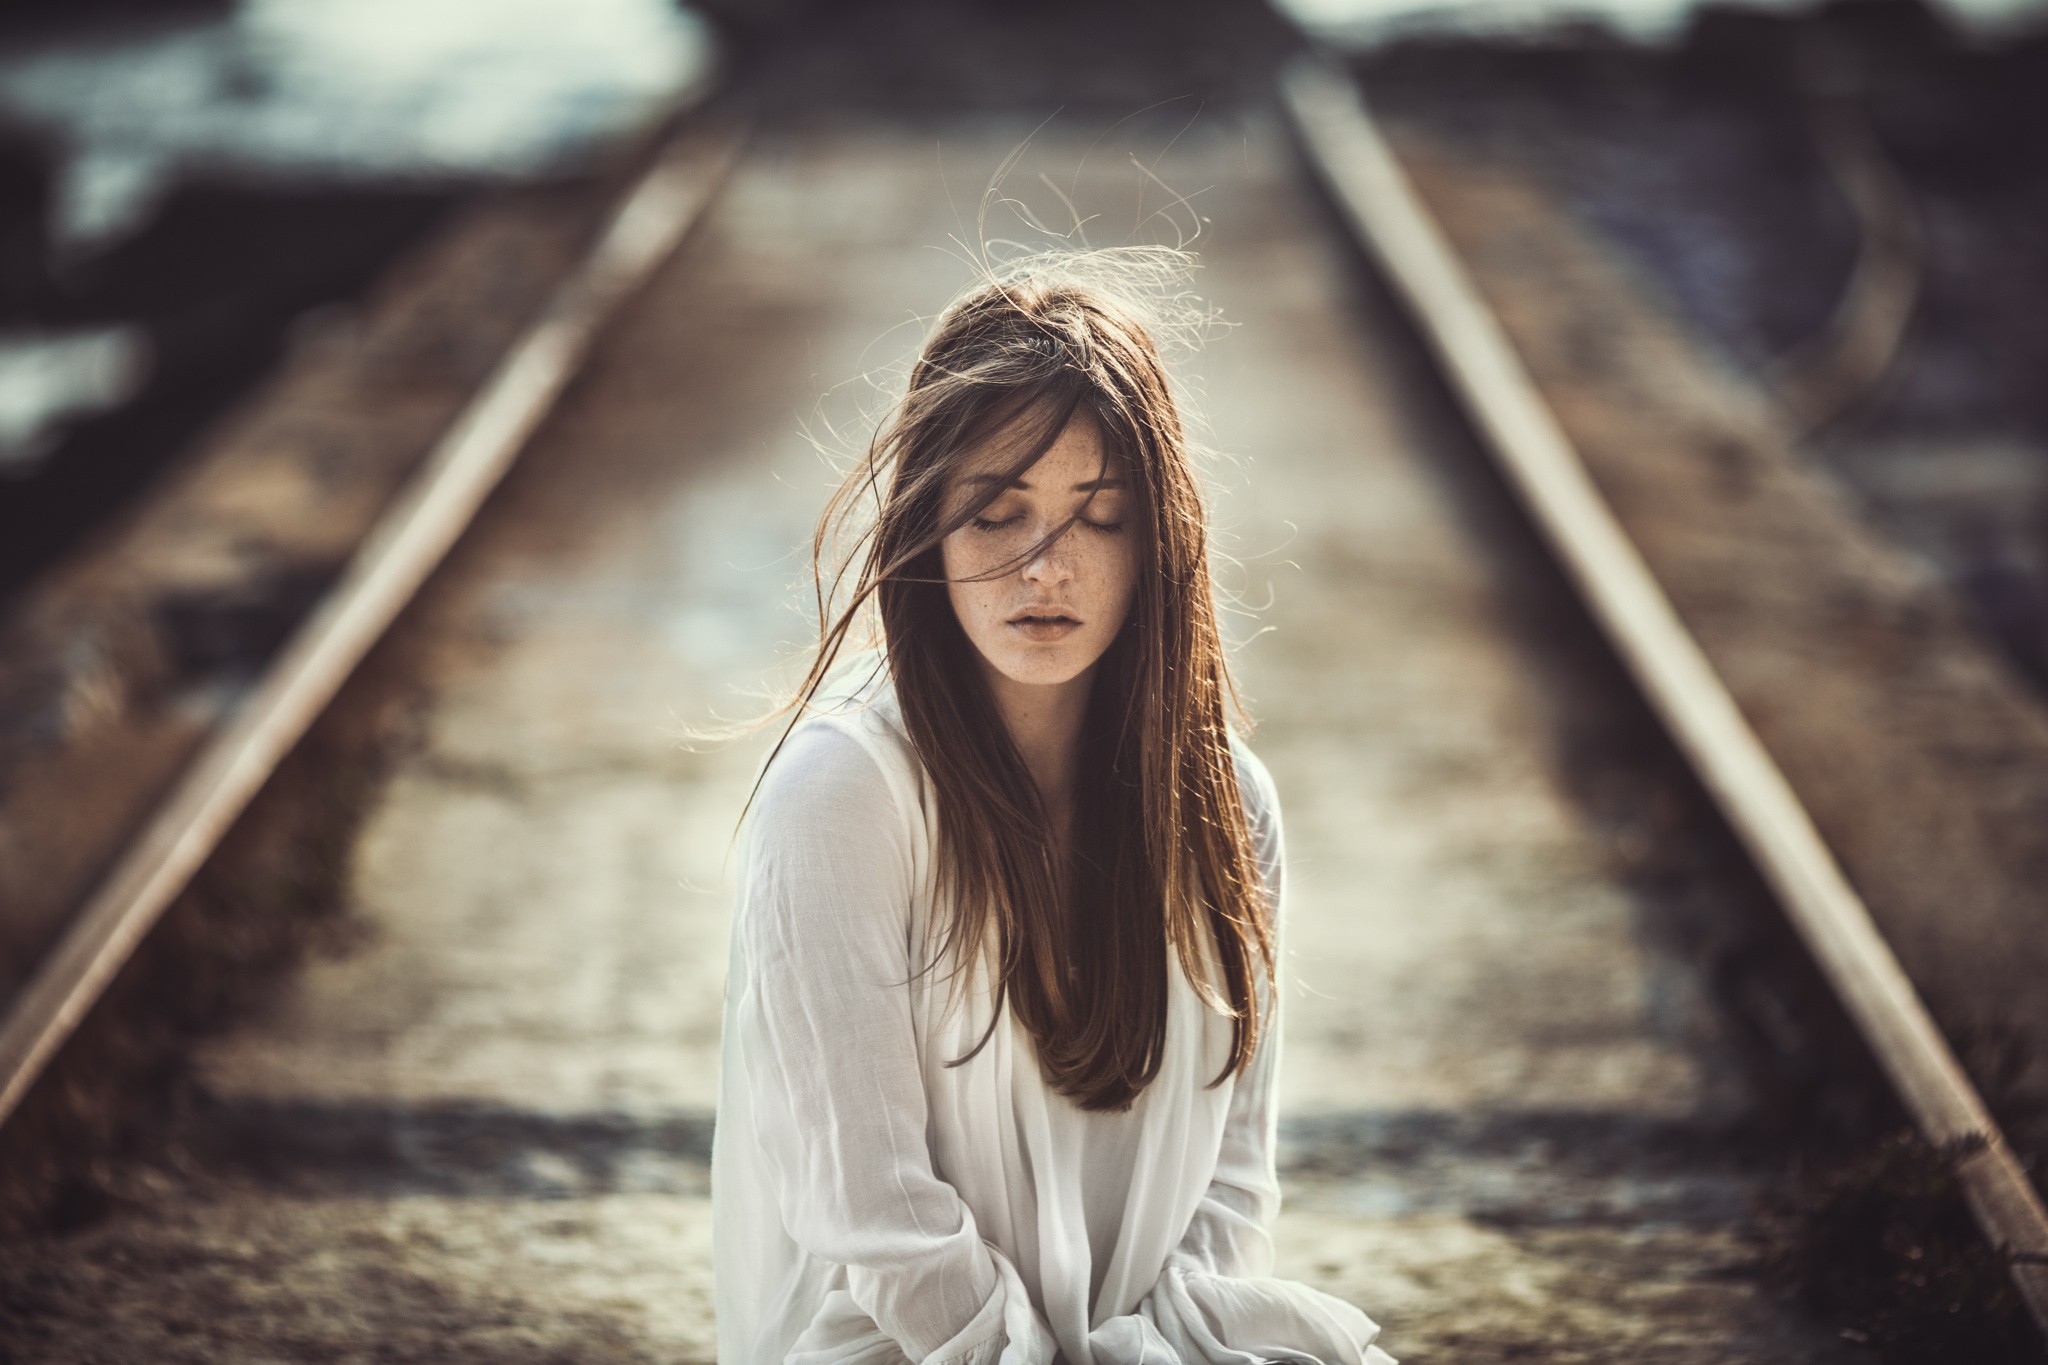 People 2048x1365 women brunette closed eyes face white clothing portrait freckles railway depth of field windy women outdoors emotion long hair hair in face Samuel Bouget